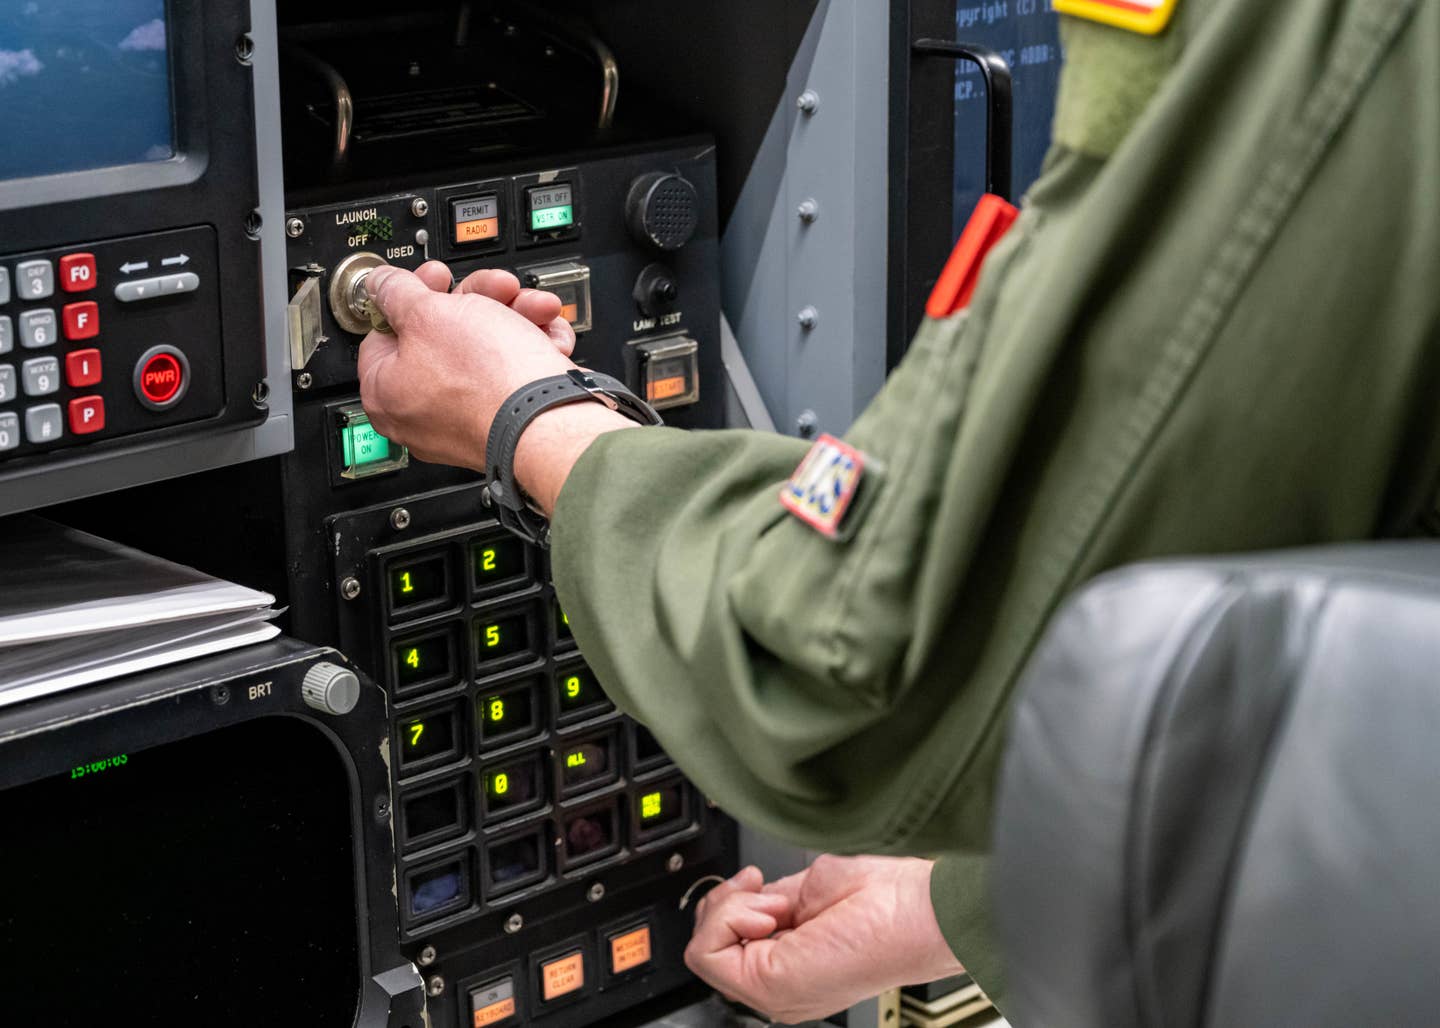 U.S. Air Force Maj. Hayden McVeigh, 625th Strategic Operations Squadron deputy missile combat crew commander-airborne, turns the keys to initiate the launch of an unarmed intercontinental ballistic missile as part of a test on April 19. <em>USAF</em>